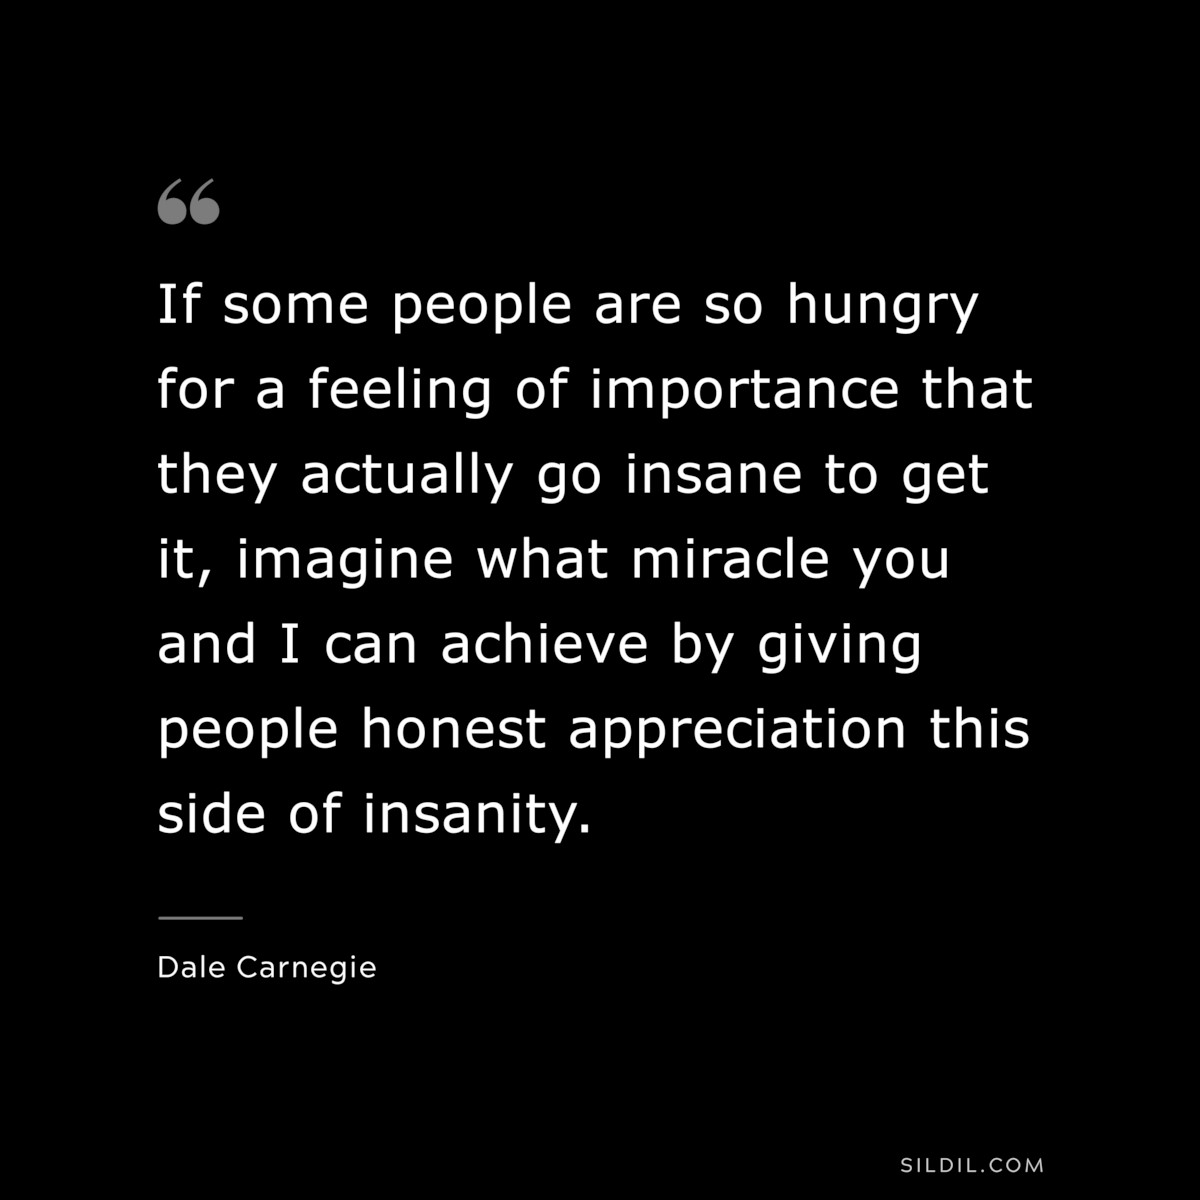 If some people are so hungry for a feeling of importance that they actually go insane to get it, imagine what miracle you and I can achieve by giving people honest appreciation this side of insanity.― Dale Carnegie